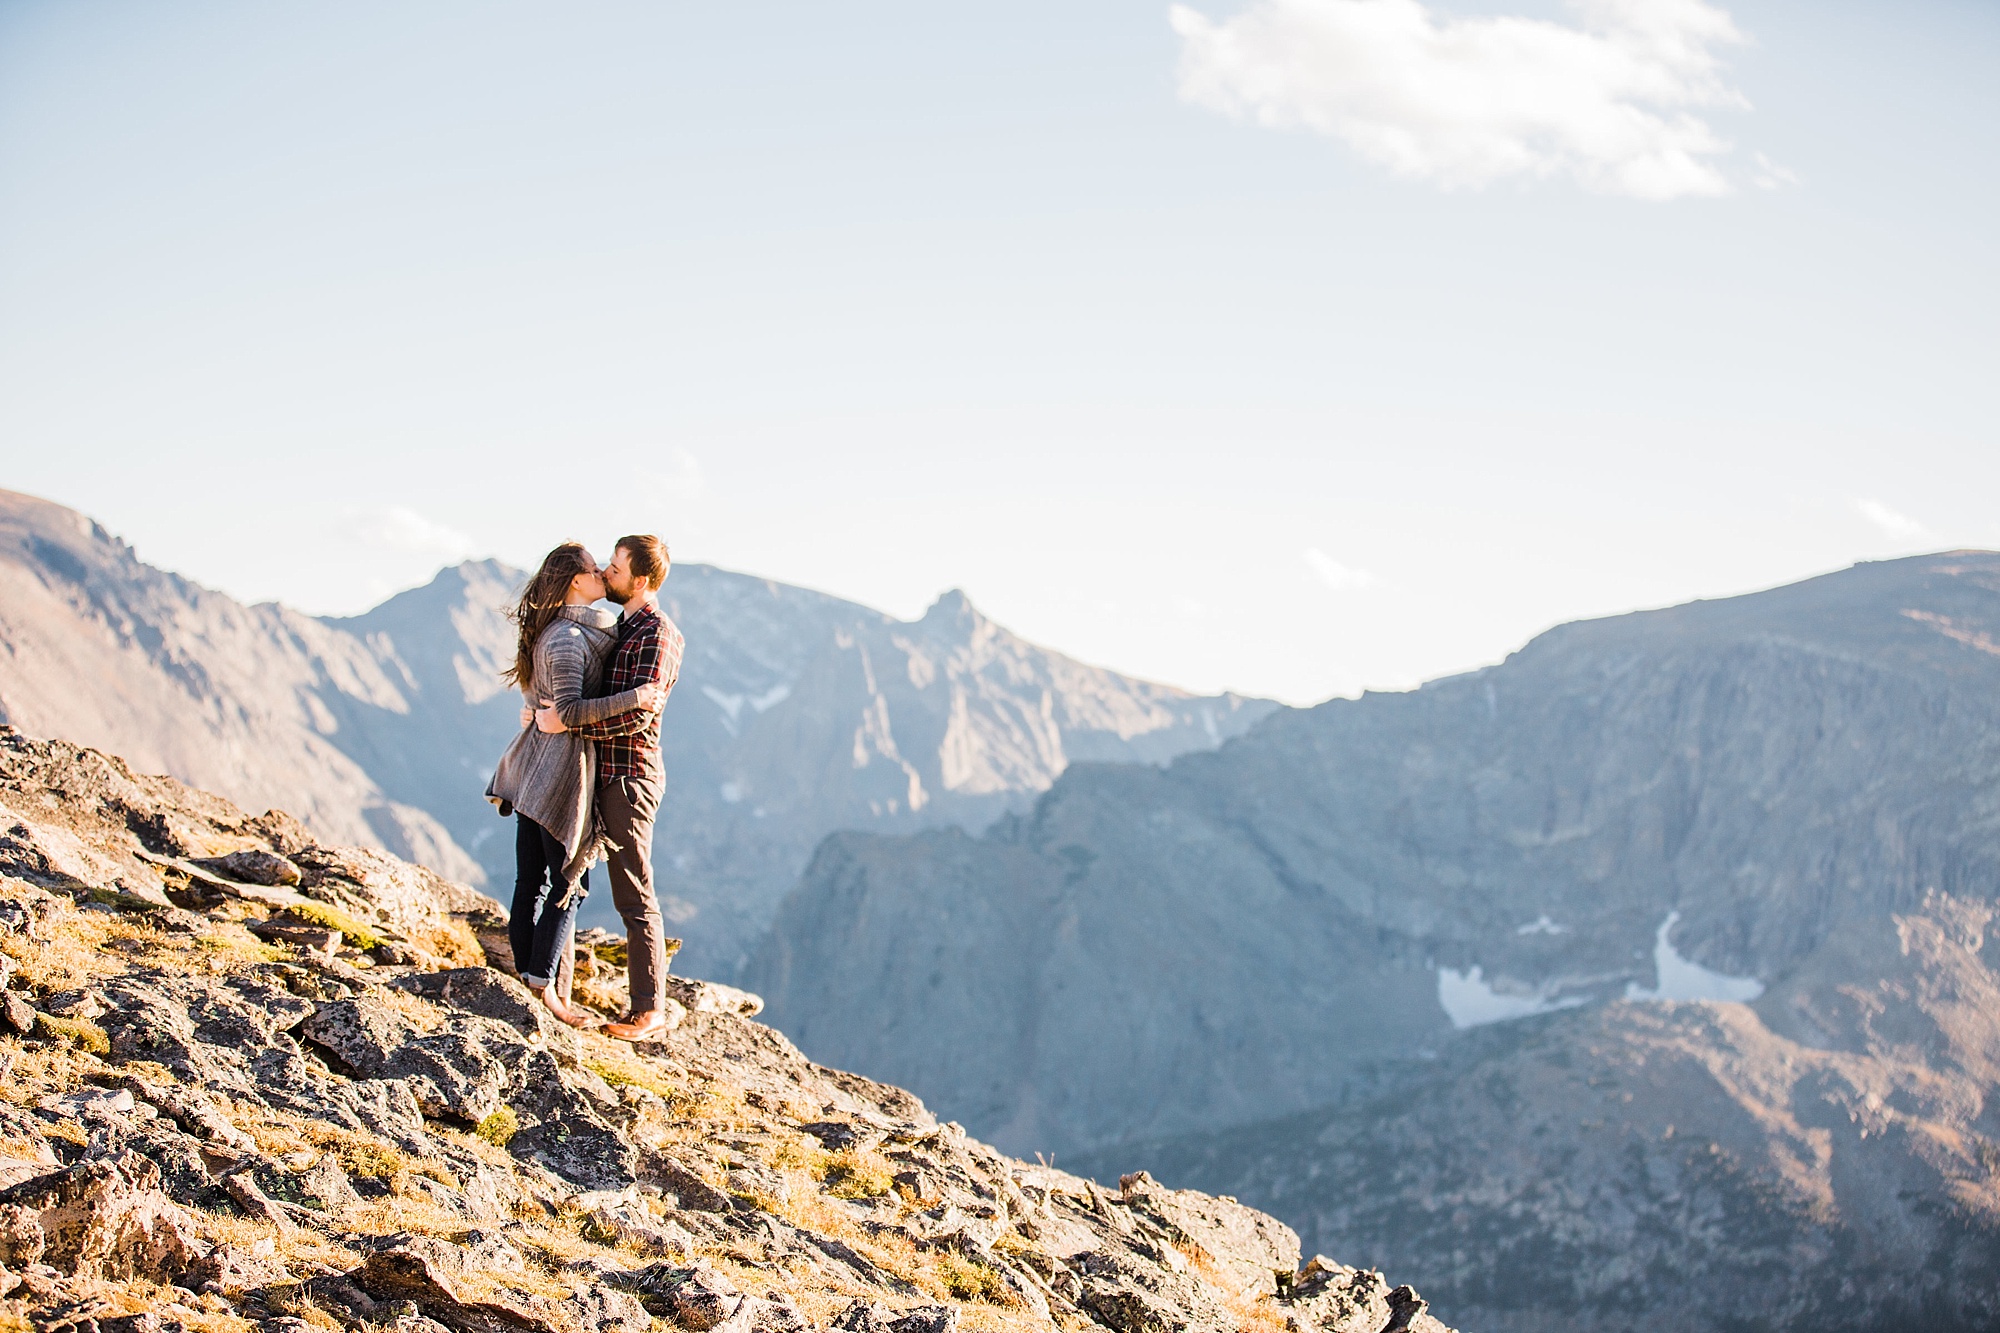 allison and ryan rocky mountain national park engagement session wedding colorado hazel and lace photographyallison and ryan rocky mountain national park engagement session wedding colorado hazel and lace photographyallison and ryan rocky mountain national park engagement session wedding colorado hazel and lace photography